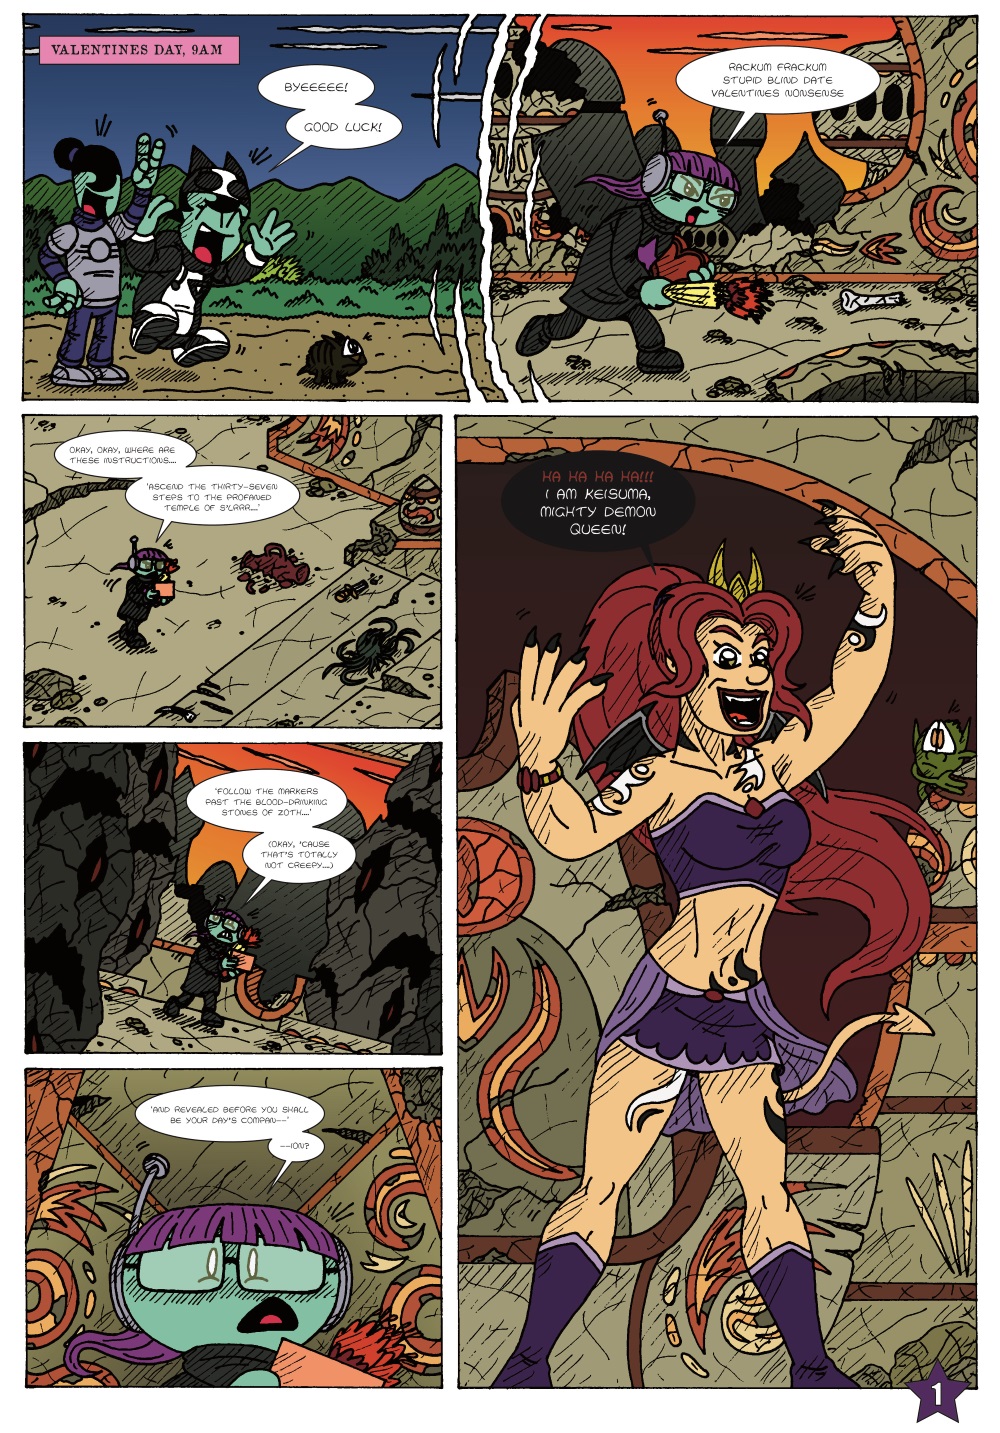 KEISUMA and Myra, Page 1 by Cartoonist_at_Large